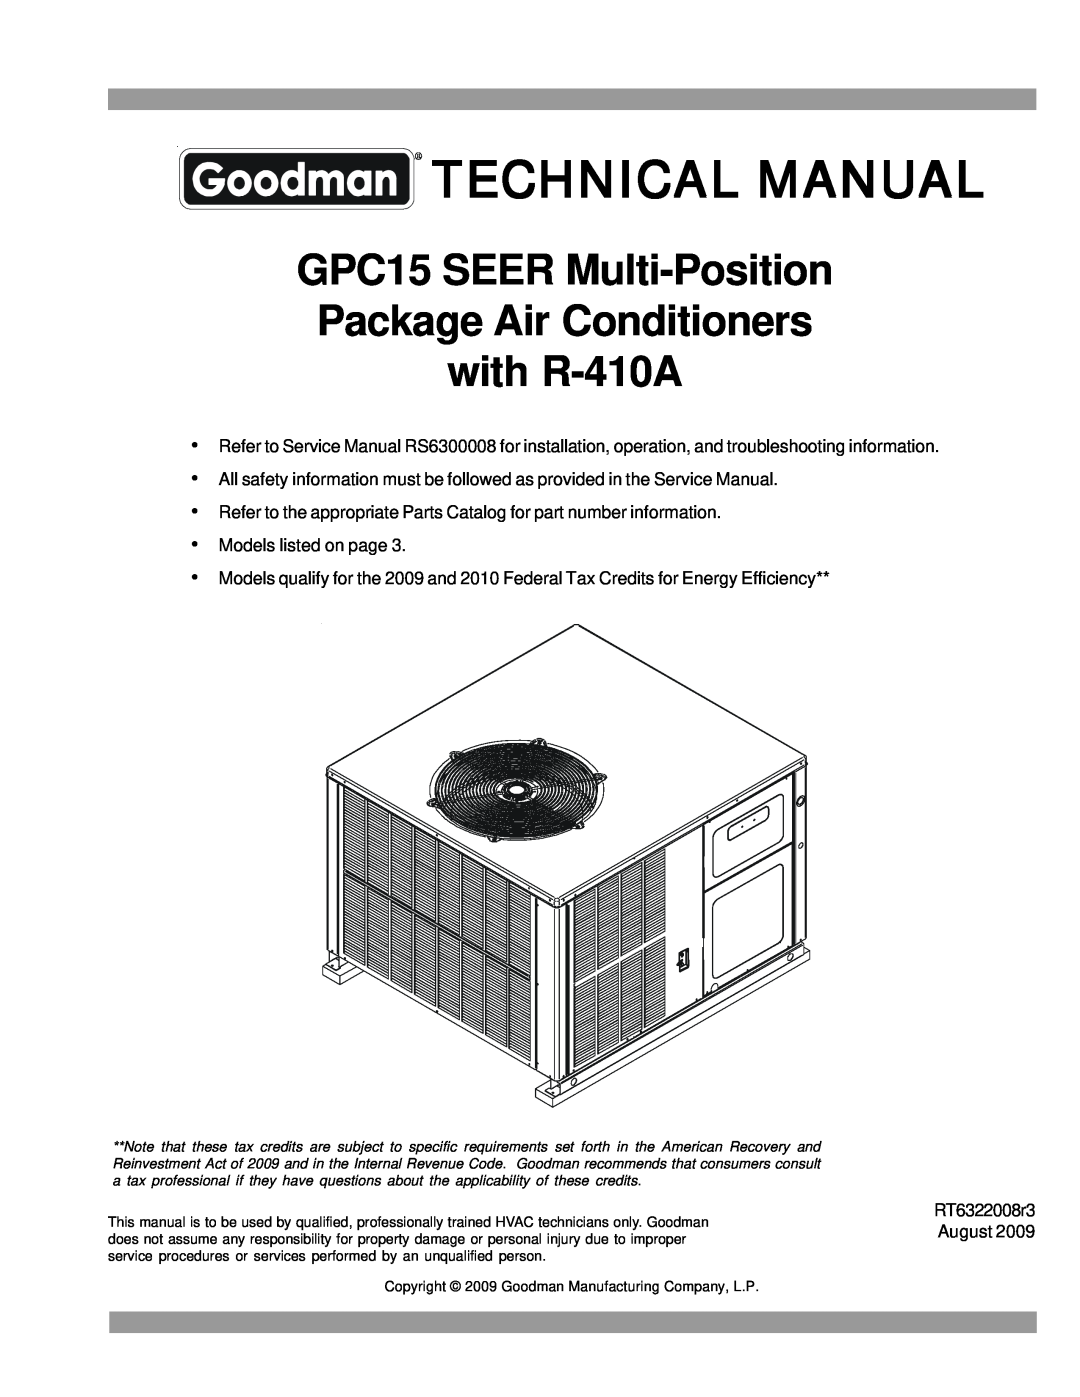 Goodman Mfg service manual Technical Manual, GPC15 SEER Multi-Position, Package Air Conditioners with R-410A 